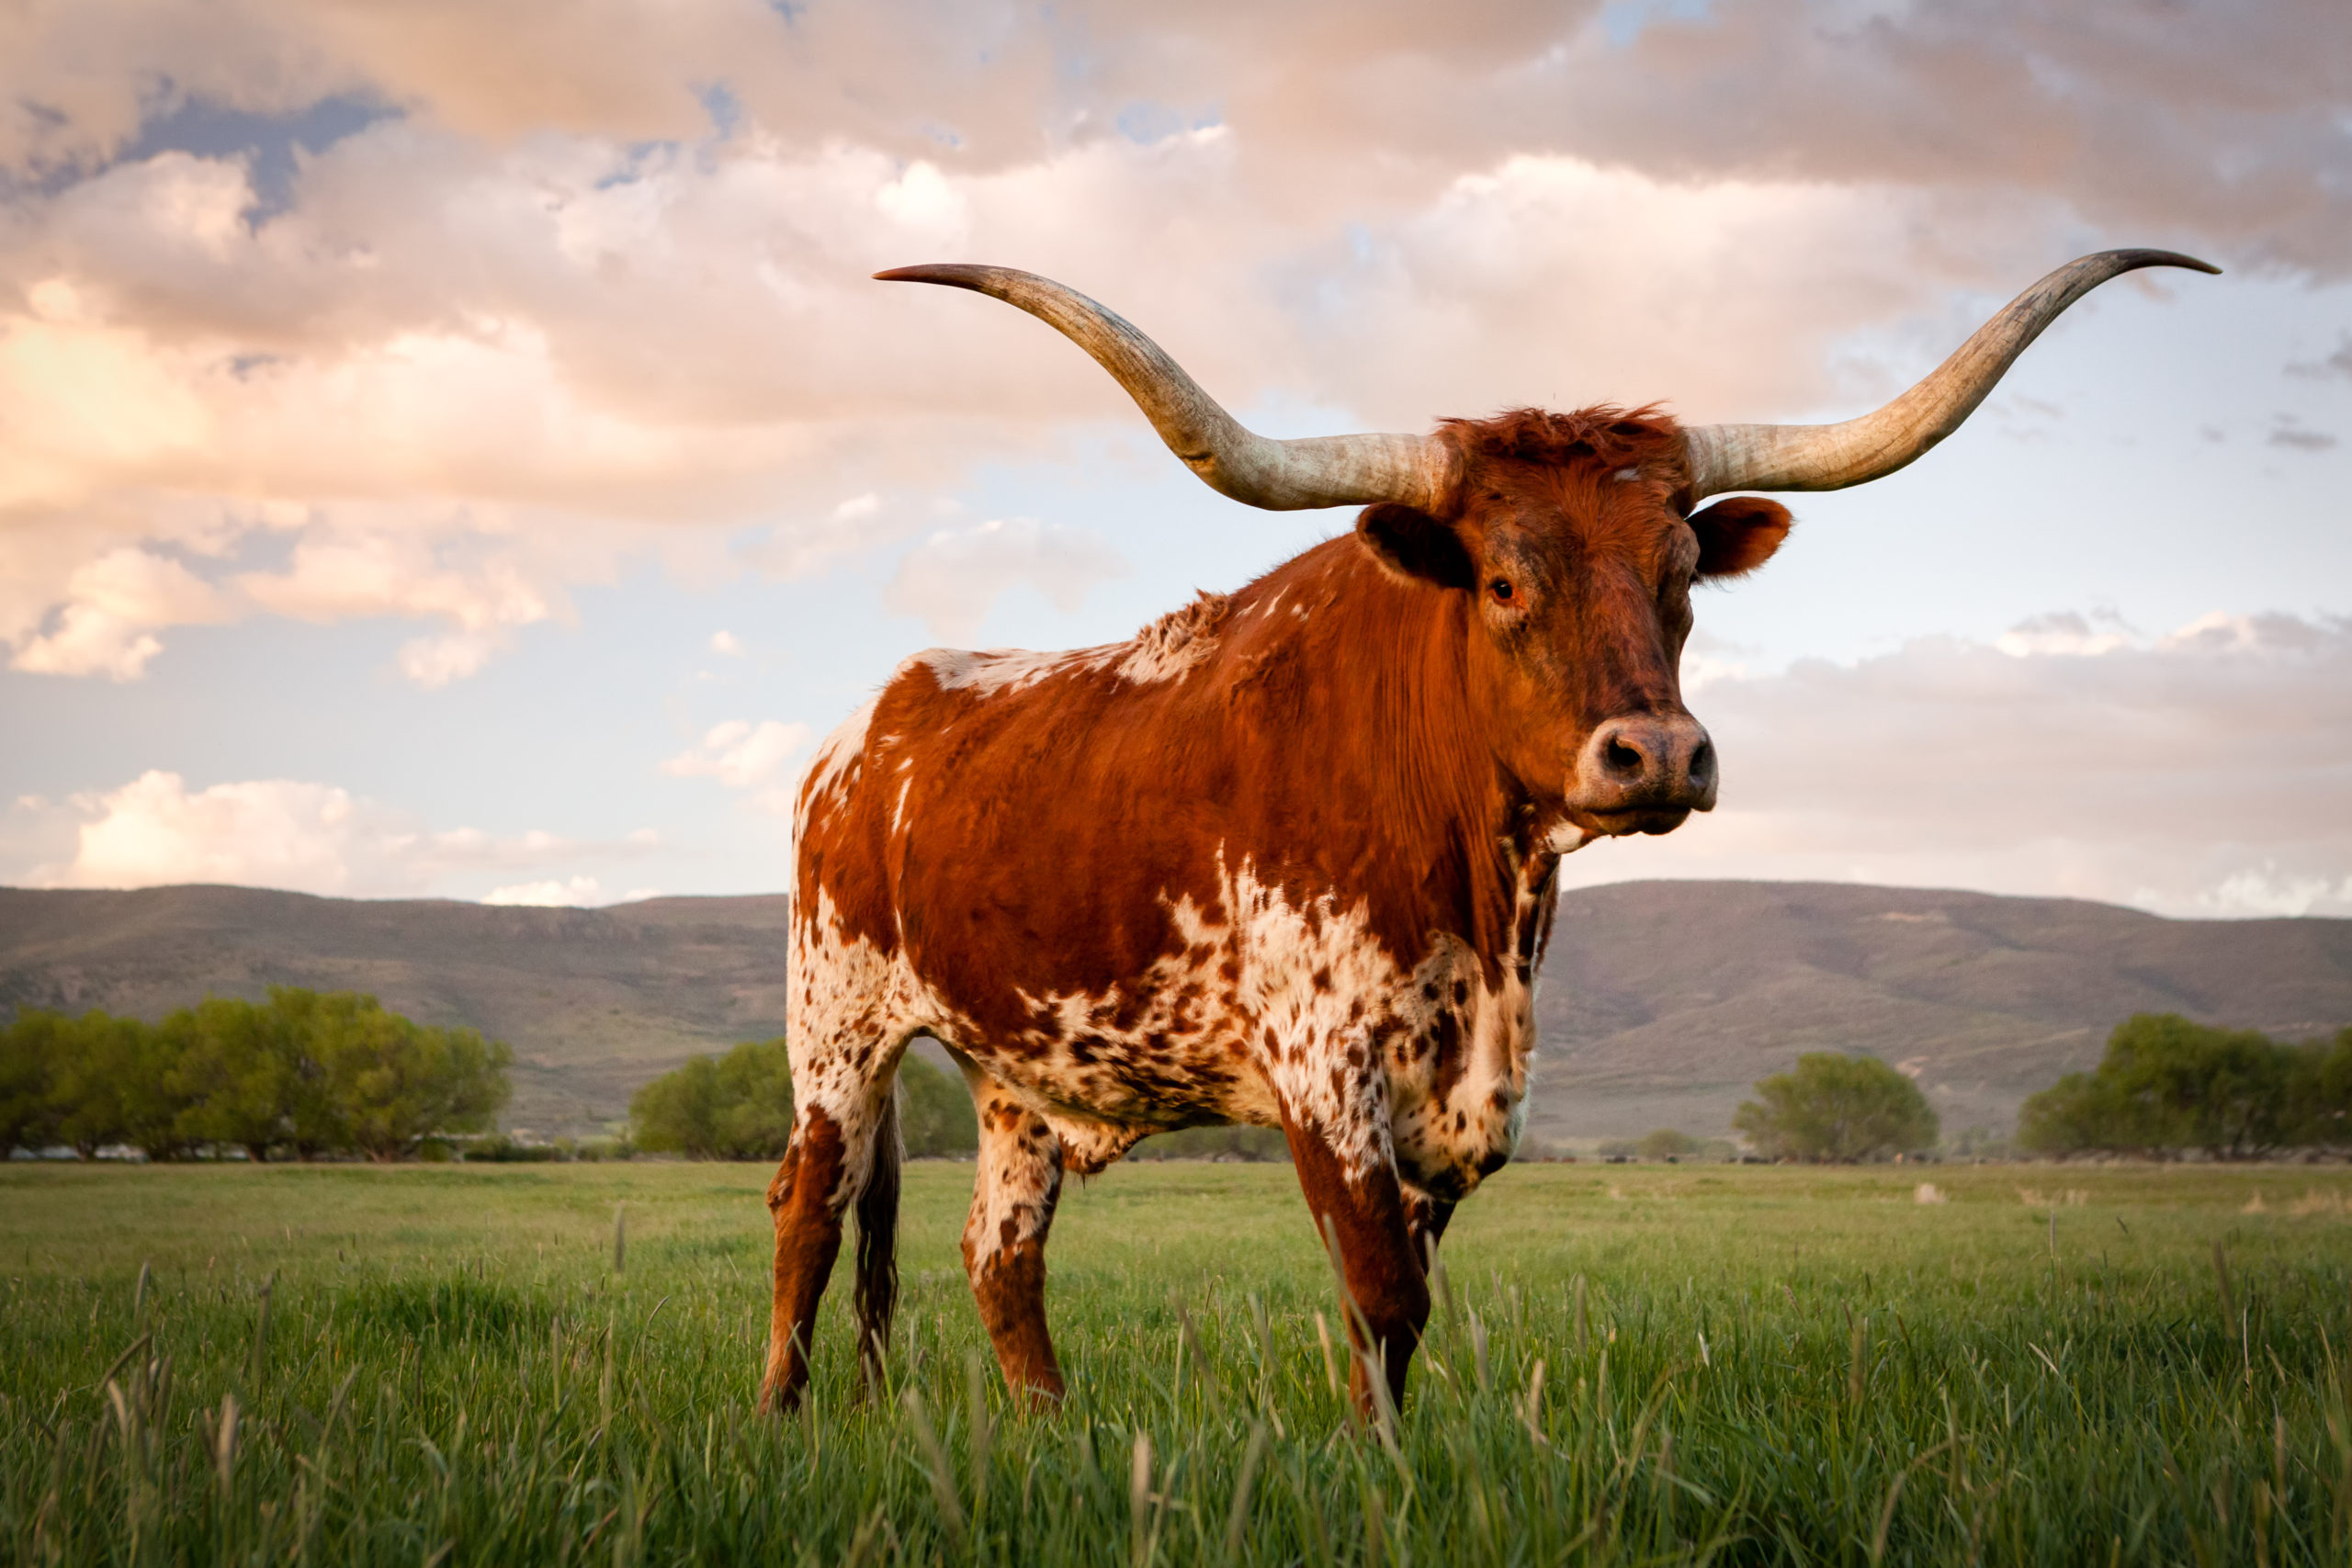 bull with big horns standing on the green field with mountains behind